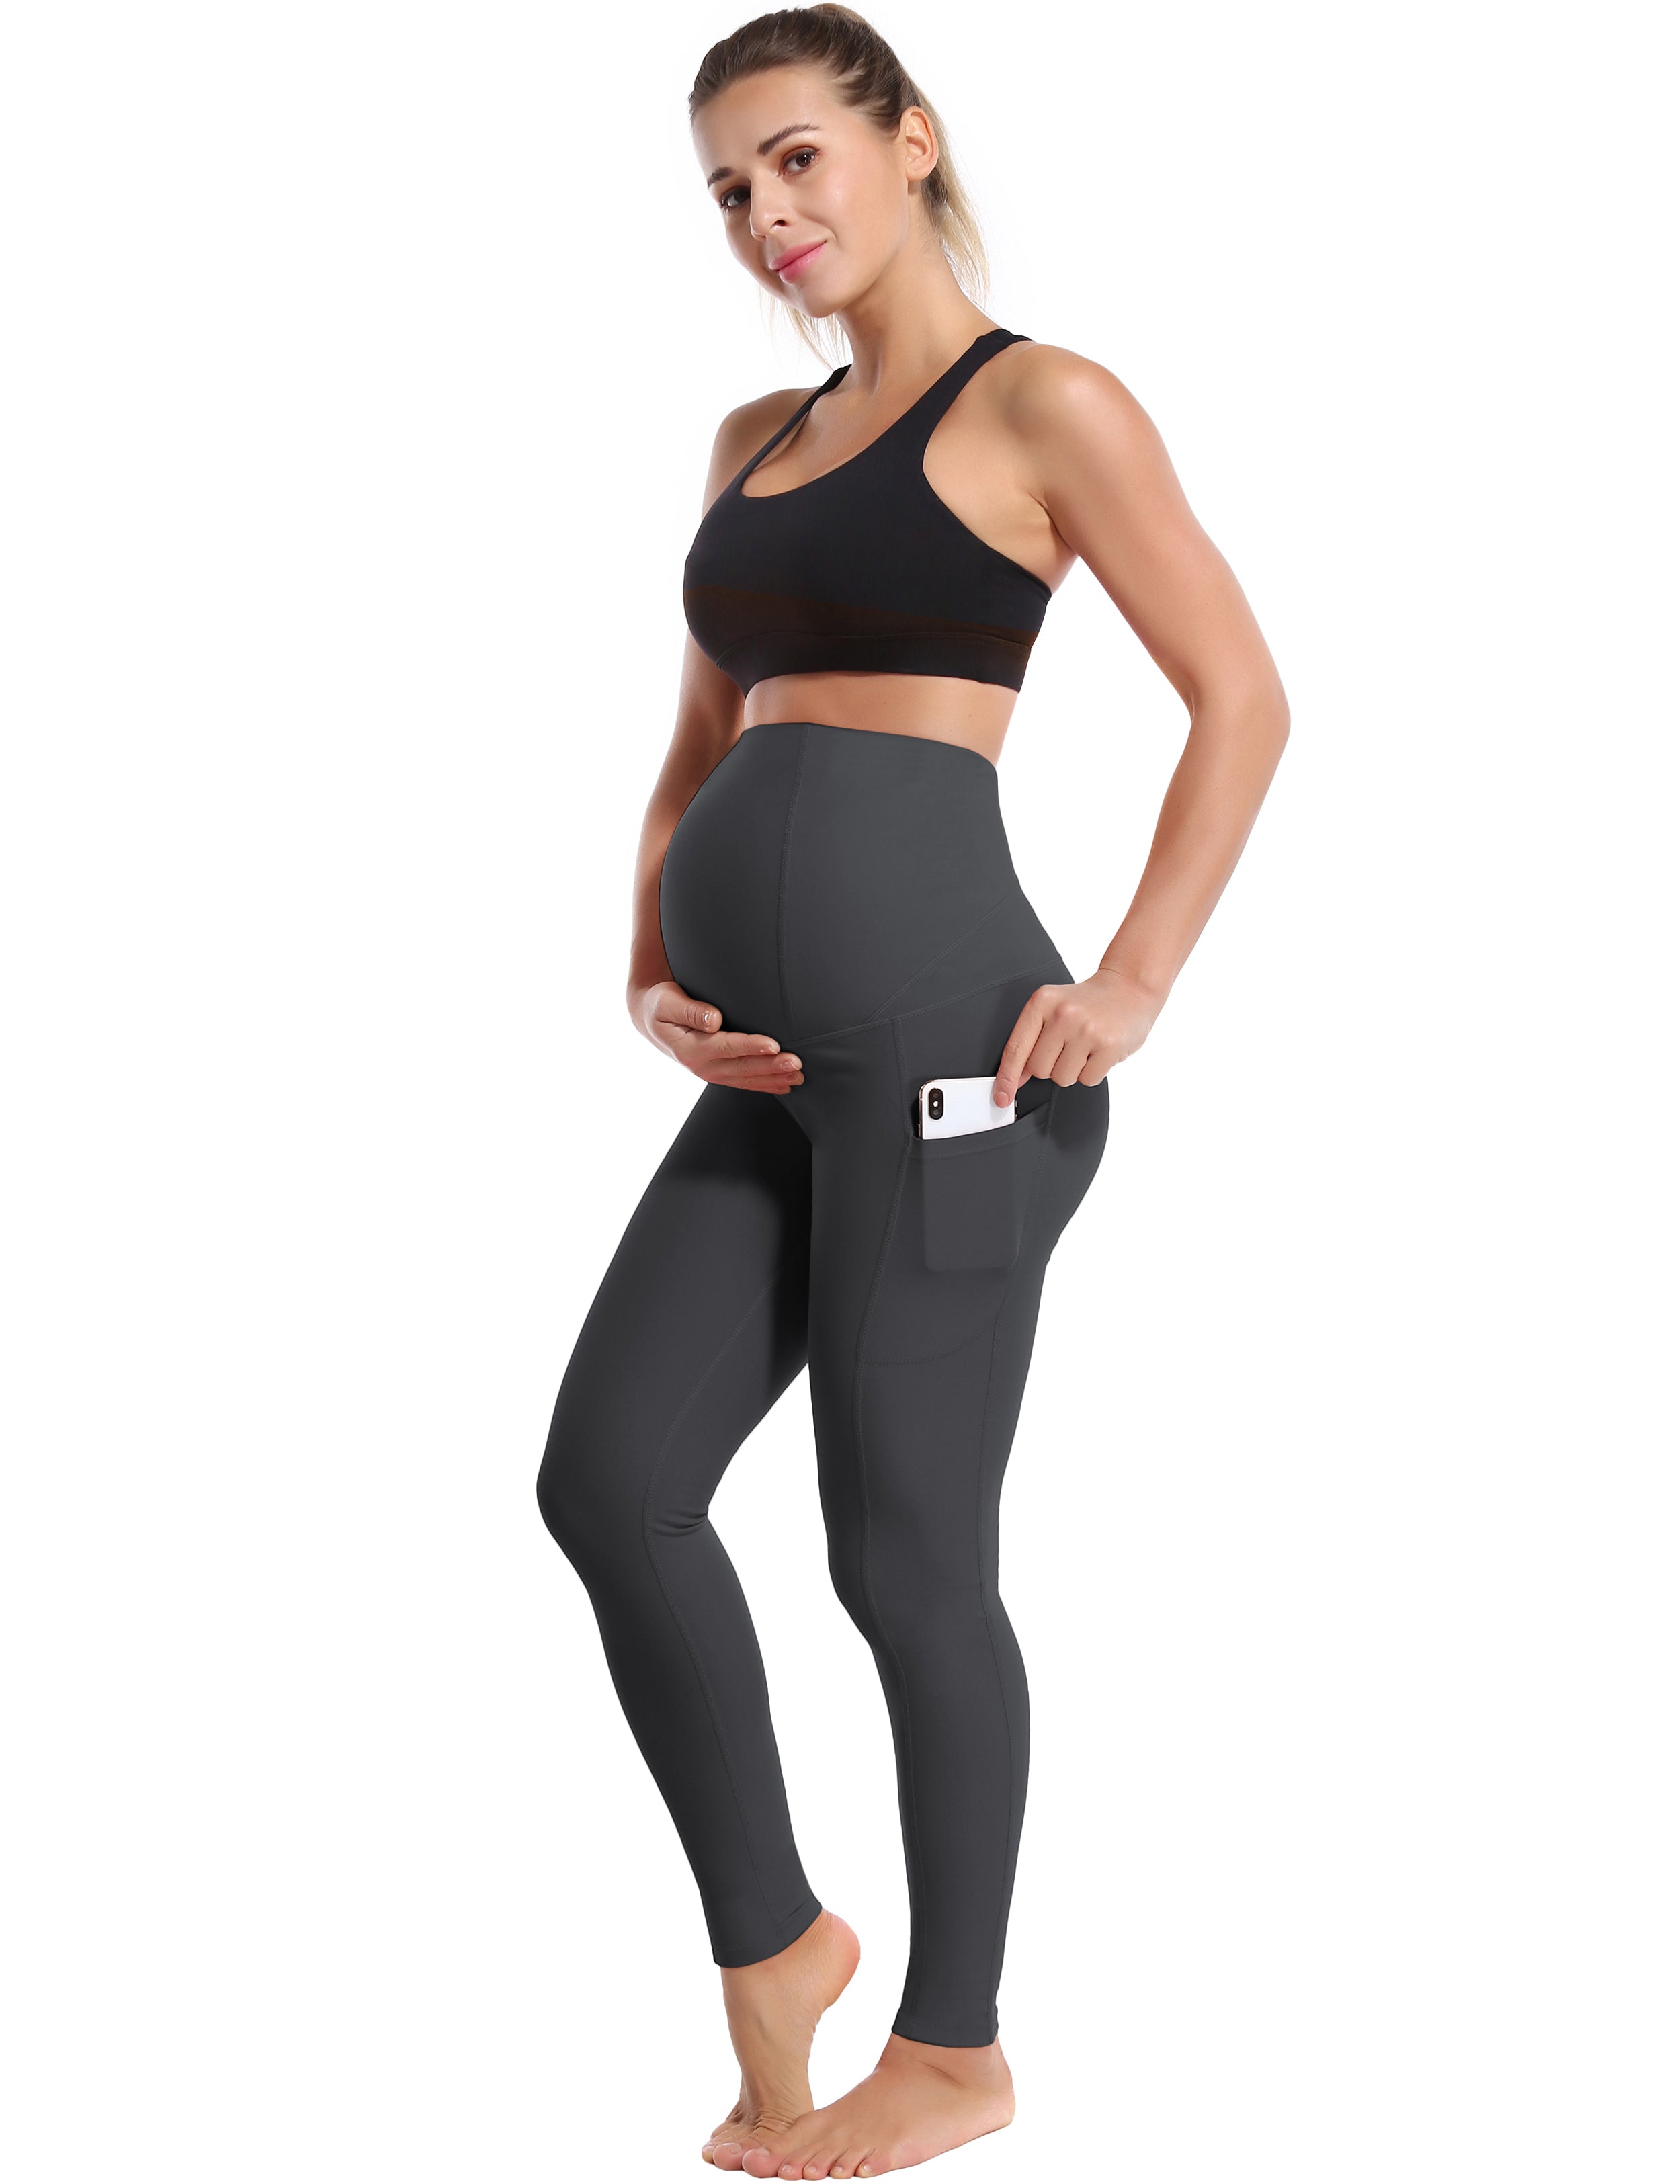 26" Side Pockets Maternity Jogging Pants shadowcharcoal 87%Nylon/13%Spandex Softest-ever fabric High elasticity 4-way stretch Fabric doesn't attract lint easily No see-through Moisture-wicking Machine wash